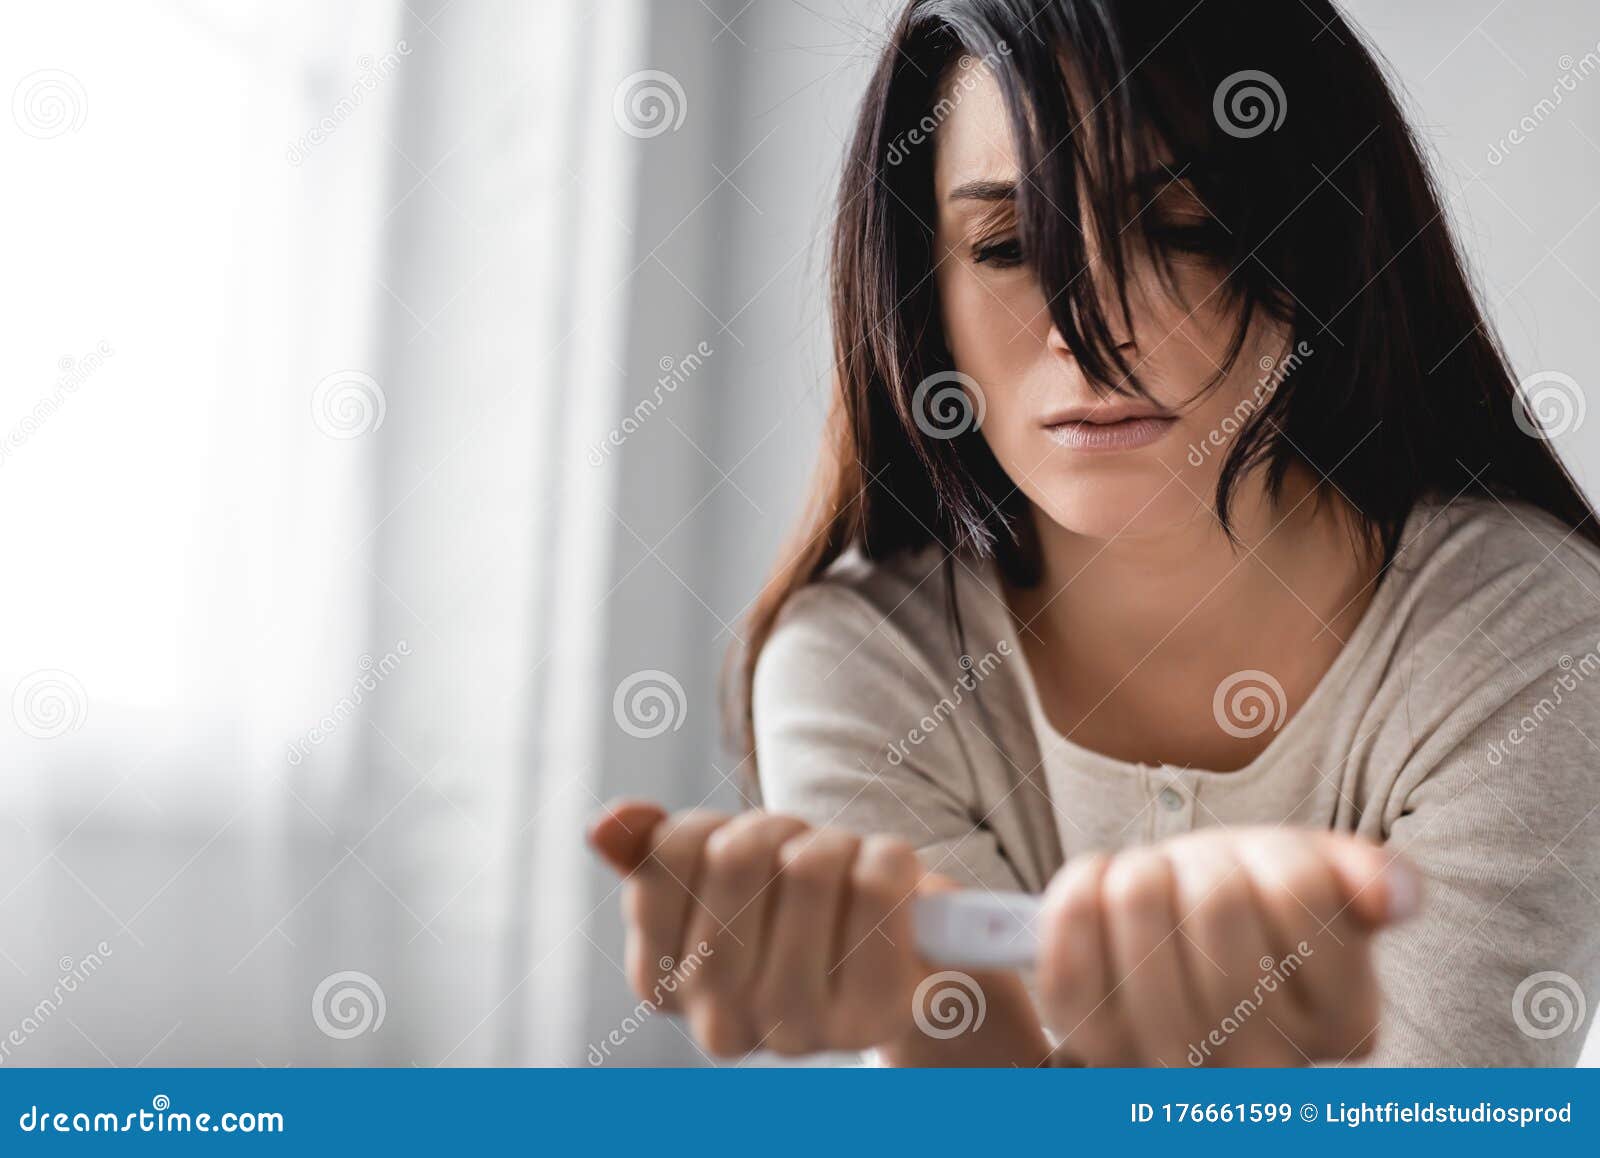 Focus of Disappointed Woman Holding Pregnancy Test with Negative Result  Stock Image - Image of sadness, healthcare: 176661599